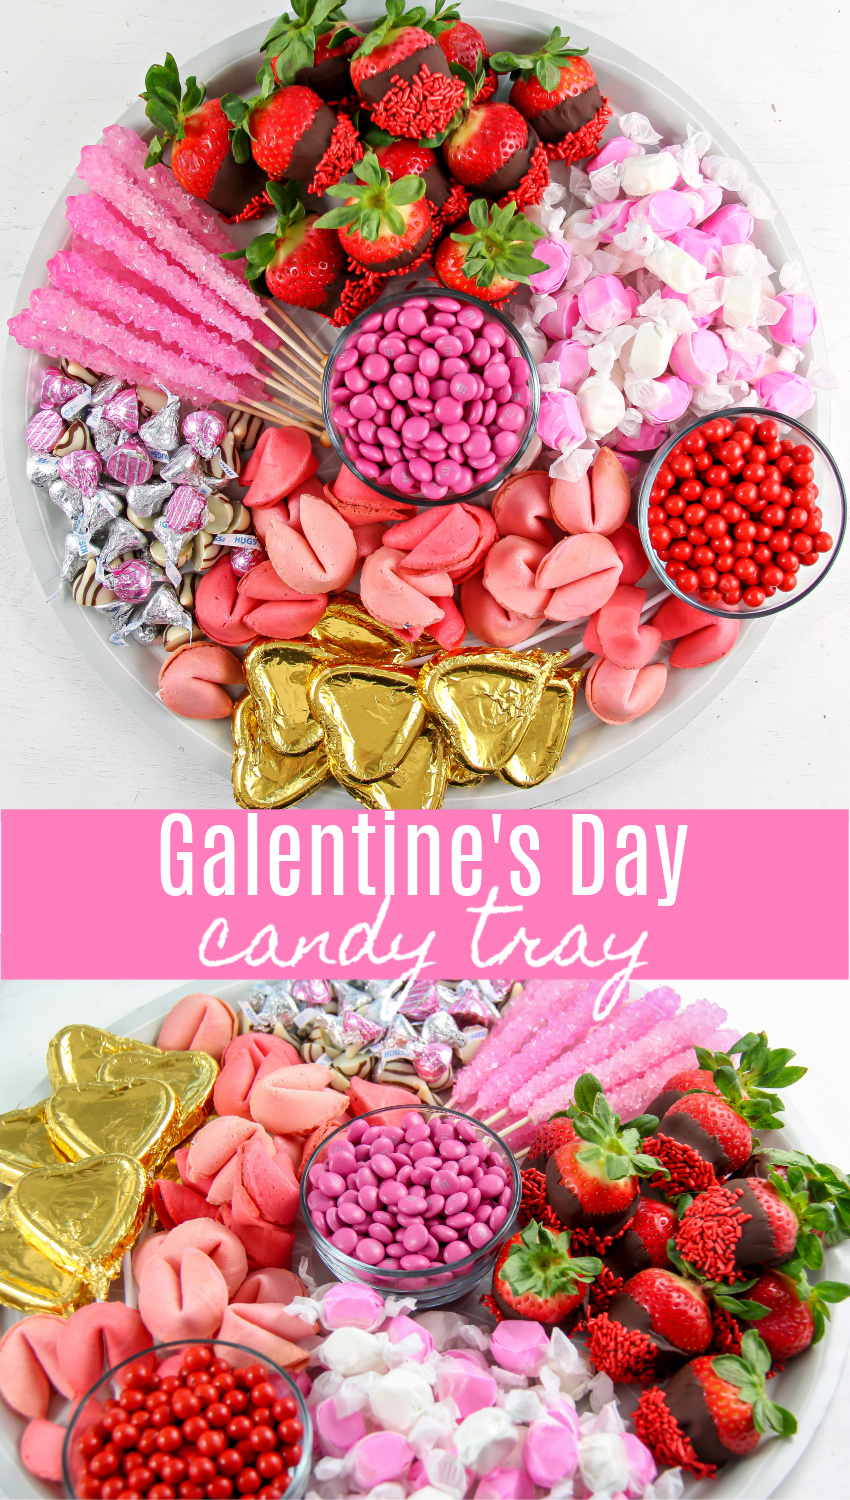 Valentine's Day candy tray Pinterest image